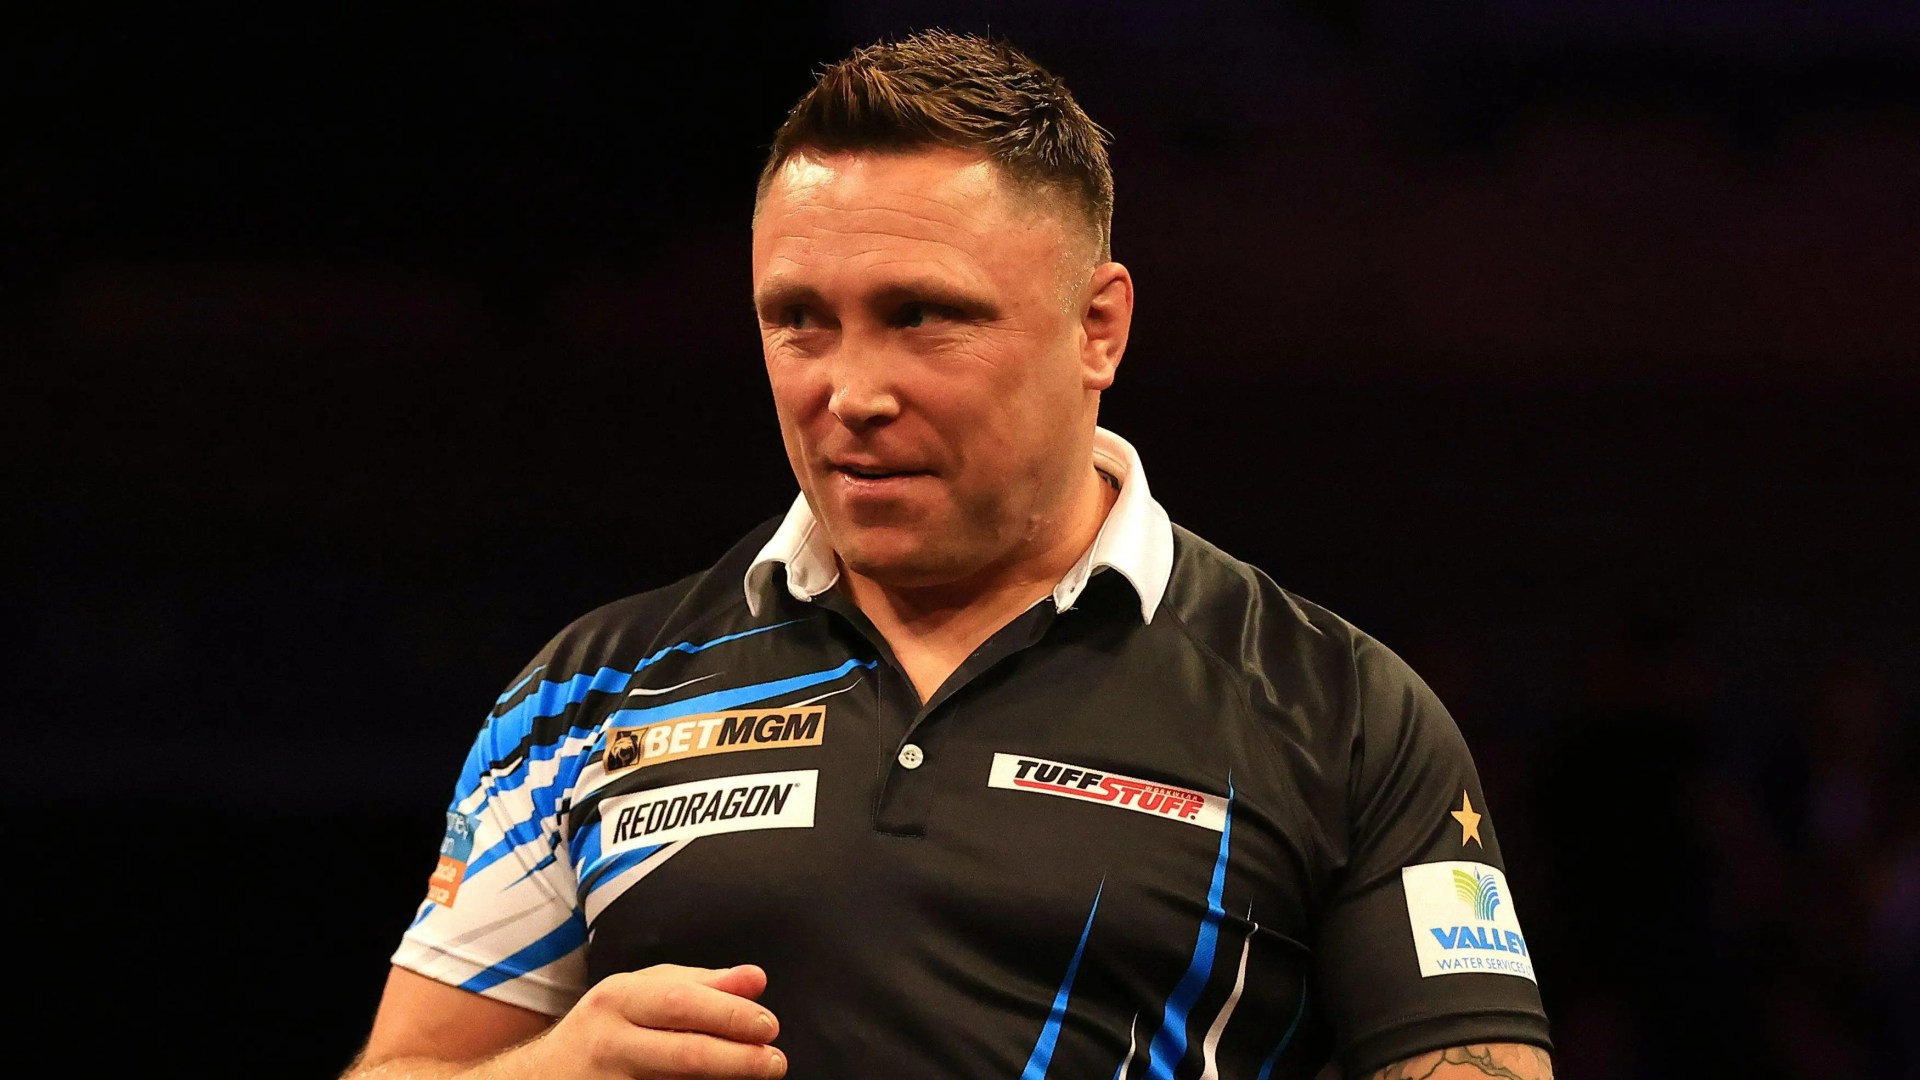 Inside Gerwyn Price’s latest side hustle as darts star shows off renovations ahead of new business venture [Video]